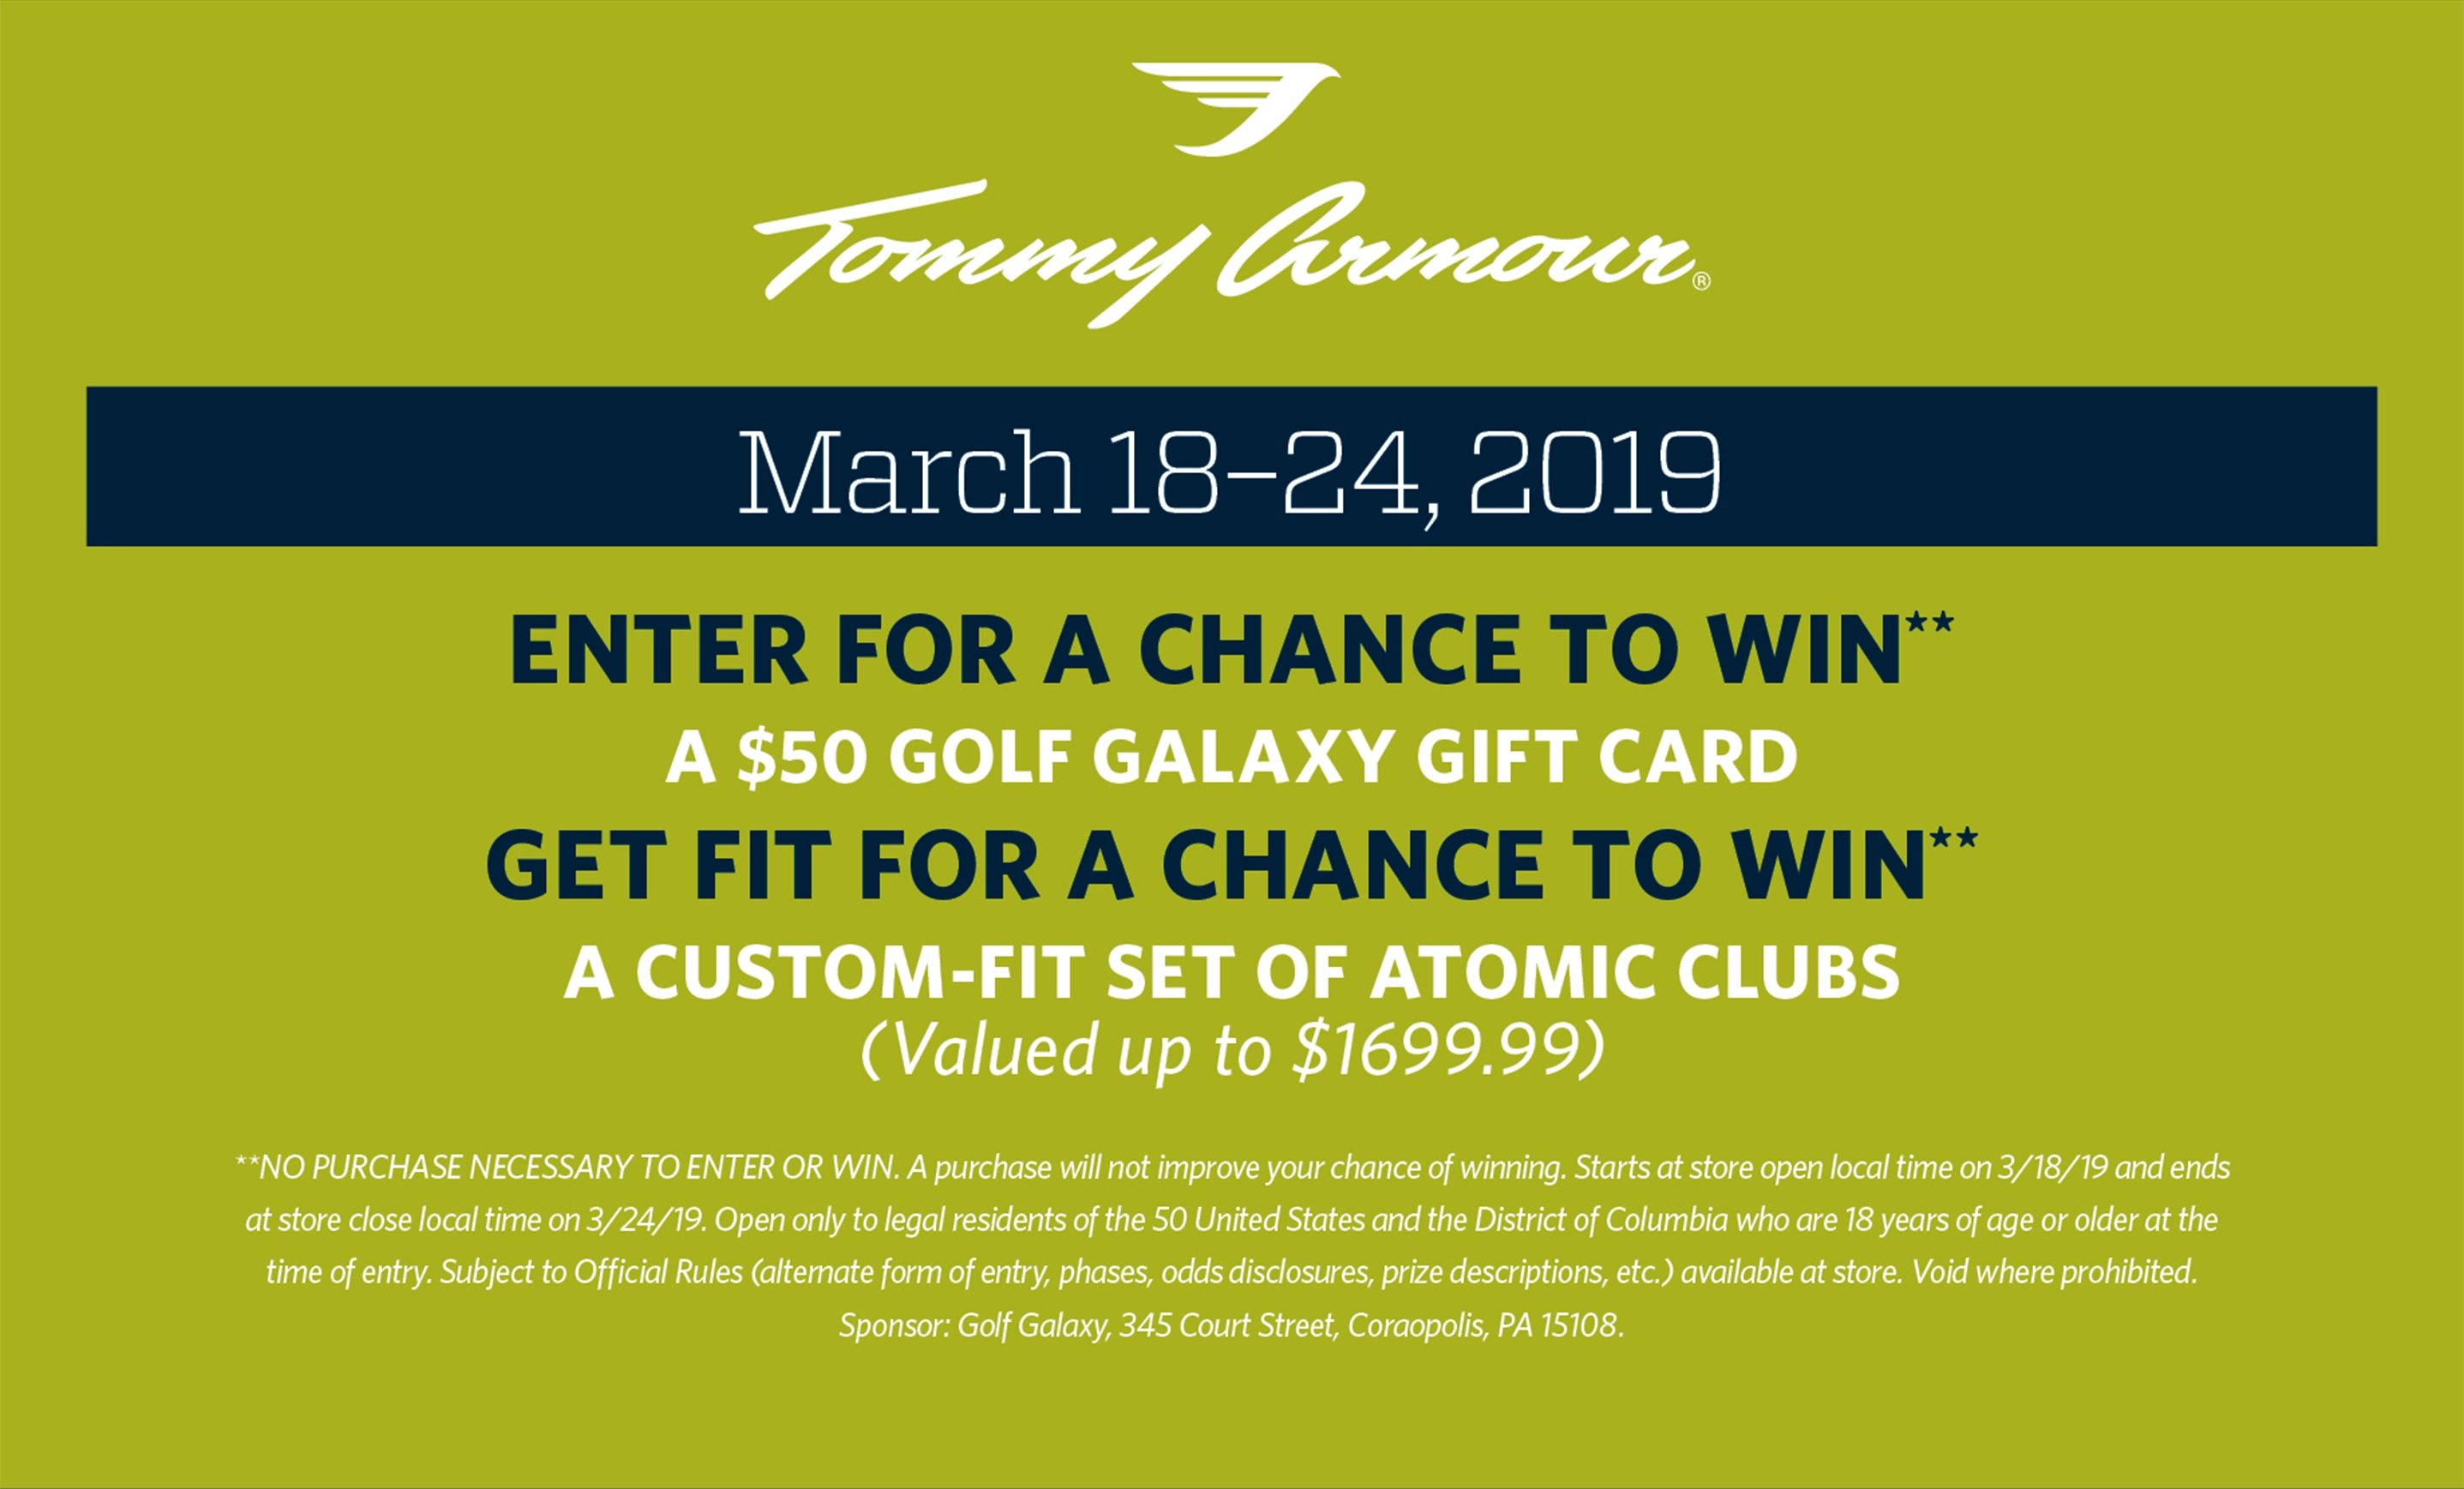 Tommy Armour | March 18–24, 2019 | Enter for a Chance to Win** A $50 Golf Galaxy gift card GET FIT for a Chance to Win** A custom-fit set of ATOMIC Clubs (Valued up to $1699.99) **NO PURCHASE NECESSARY TO ENTER OR WIN. A purchase will not improve your chance of winning. Starts at store open local time on 3/18/19 and ends at store close local time on 3/24/19. Open only to legal residents of the 50 United States and the District of Columbia who are 18 years of age or older at the time of entry. Subject to Official Rules (alternate form of entry, phases, odds disclosures, prize descriptions, etc.) available at store. Void where prohibited. Sponsor: Golf Galaxy, 345 Court Street, Coraopolis, PA 15108.